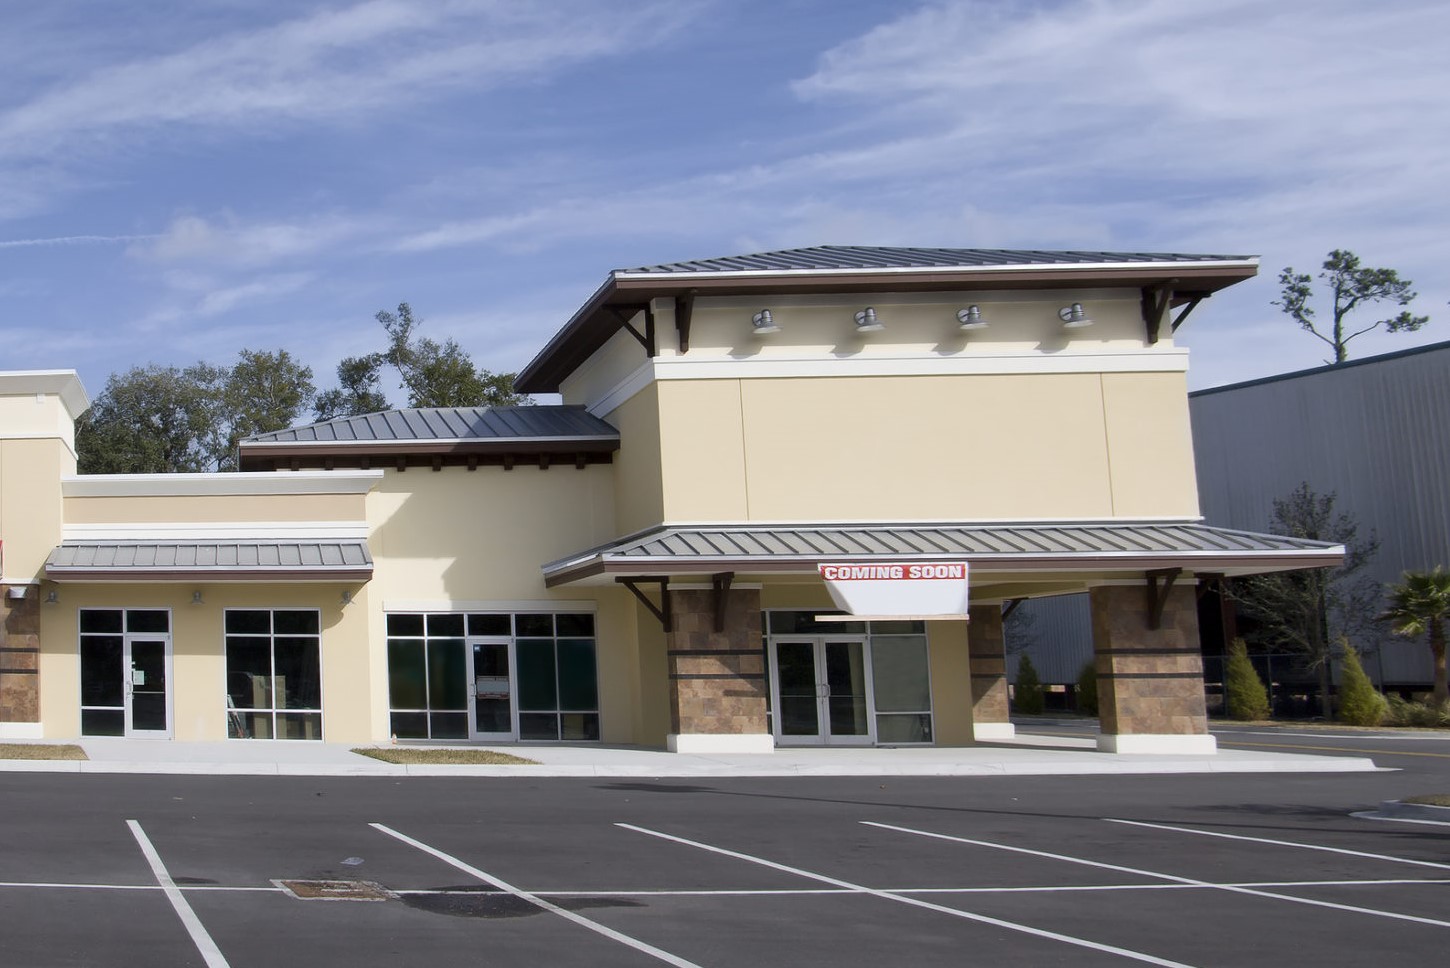 Strip Mall with Standing Seam Metal Roof